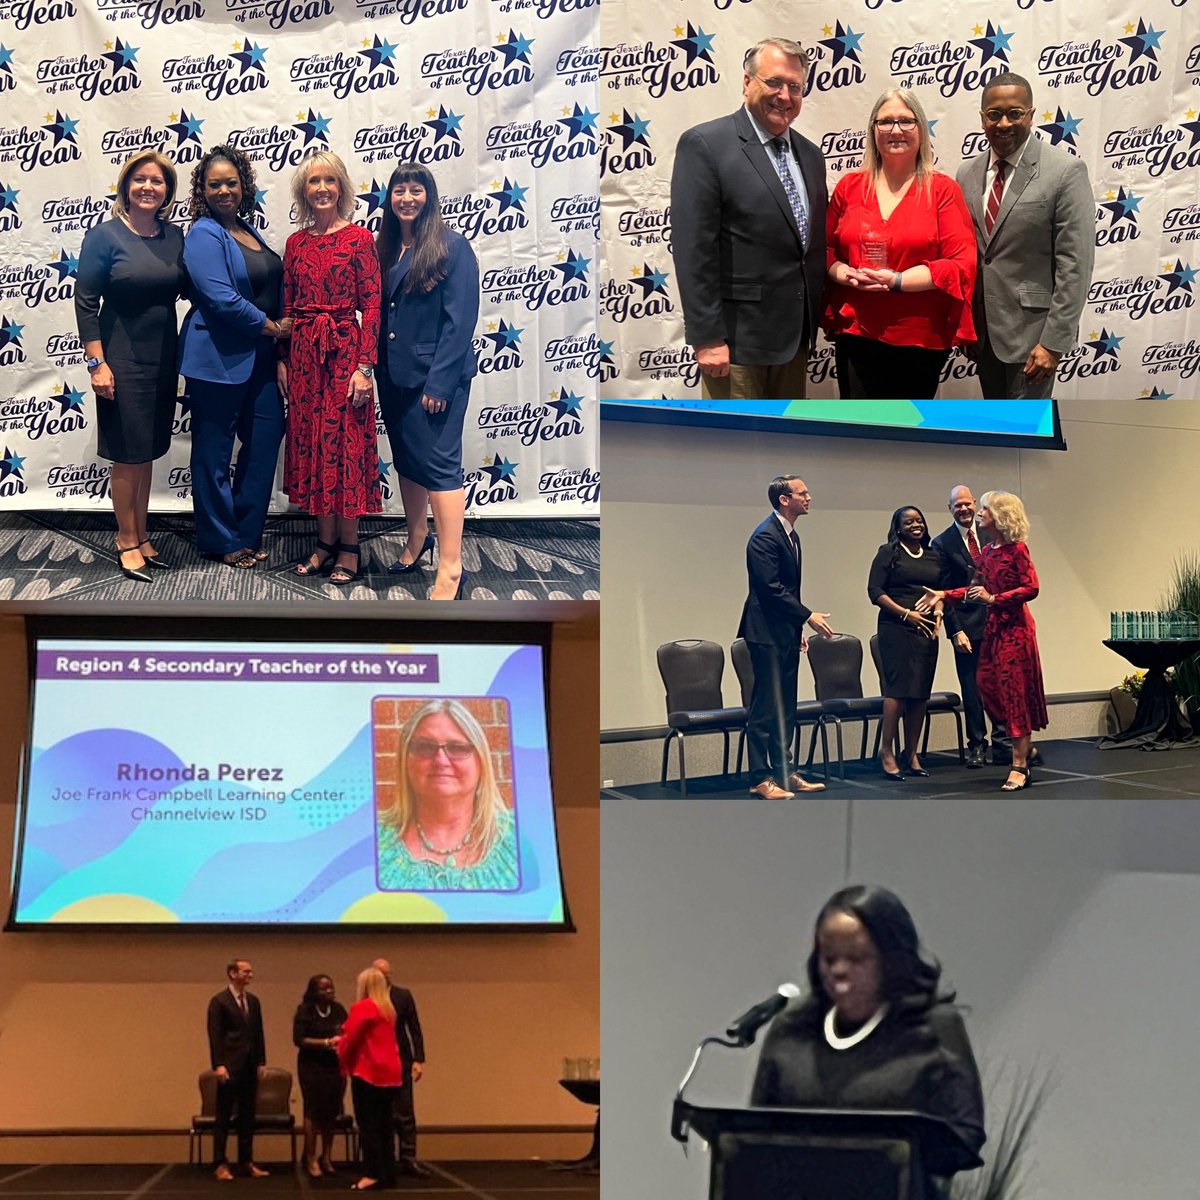 Inspired by the exceptional educators recognized at the @tasanet Texas Teachers of the Year Luncheon, especially our #R4TOYs . Their commitment uplifts our schools and ignites a love for learning. #R4Proud moments like these remind us of the power of education!  #TXTOY